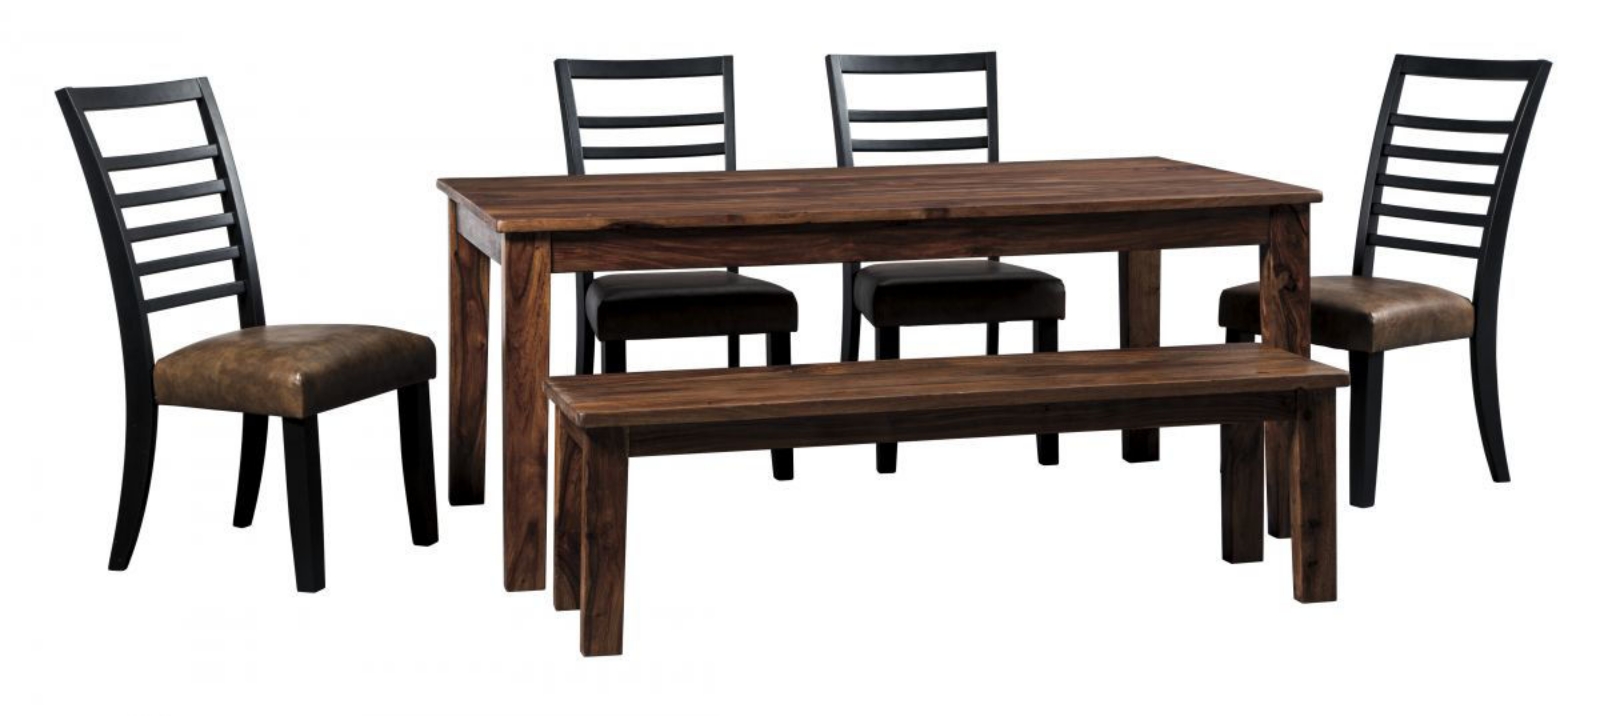 Picture of Manishore Table, 4 Chairs & Bench